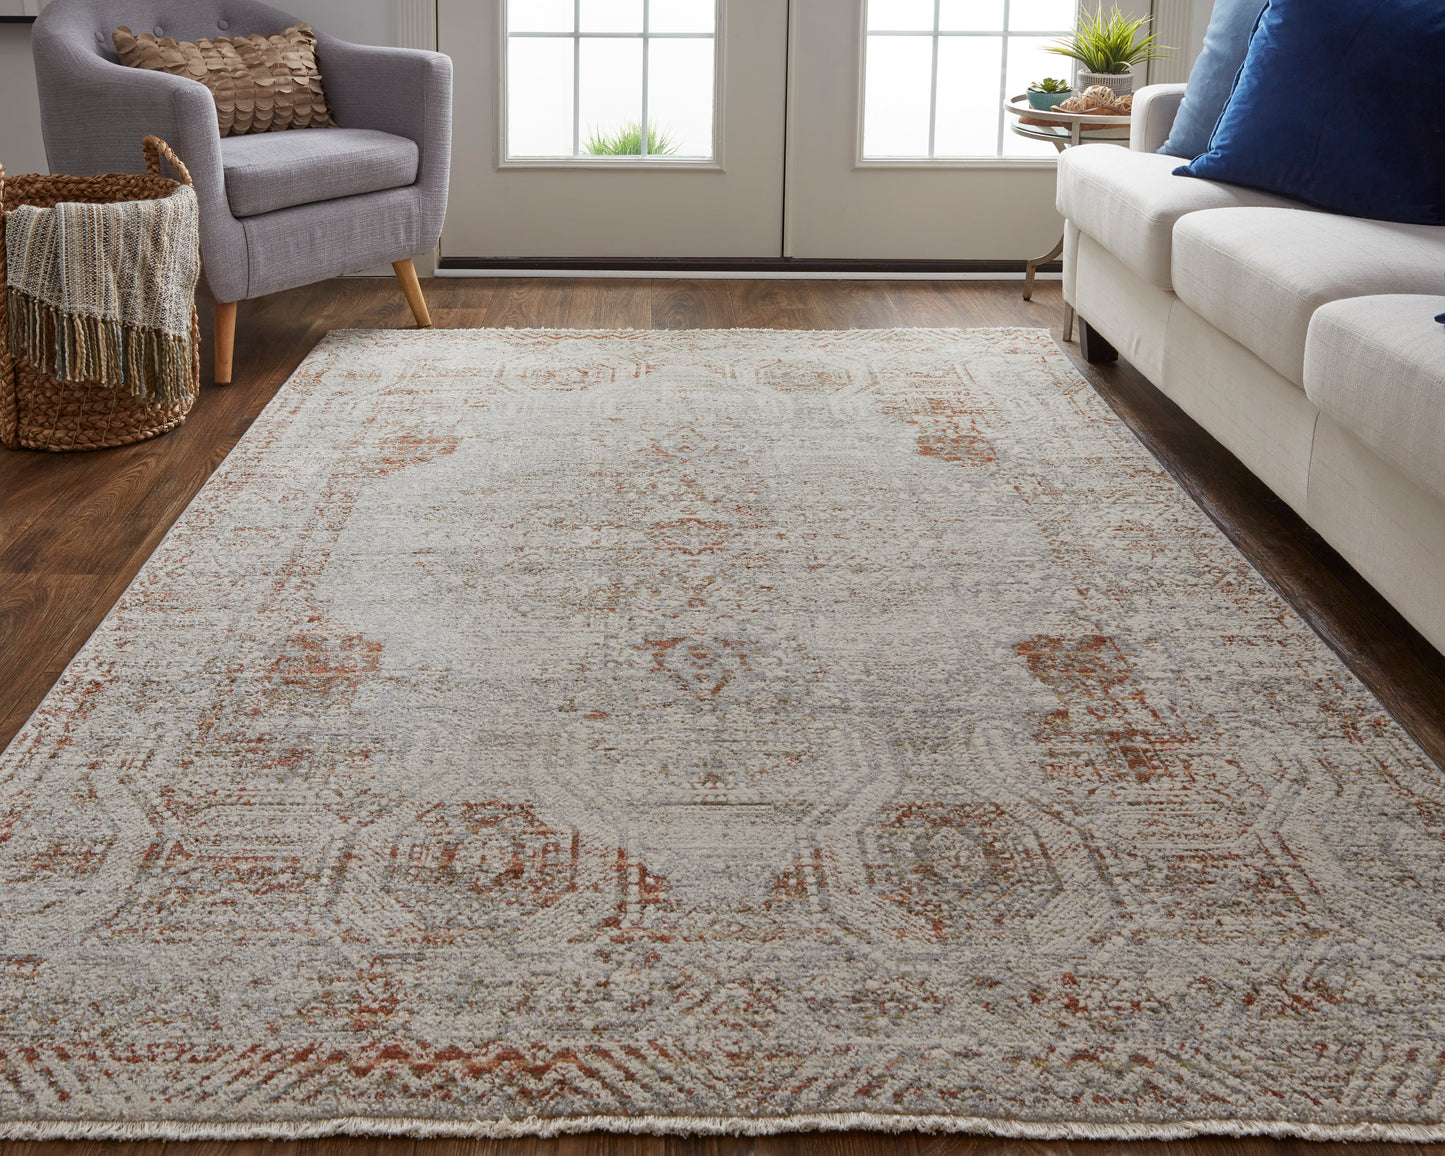 Kaia 39GKF Power Loomed Synthetic Blend Indoor Area Rug by Feizy Rugs